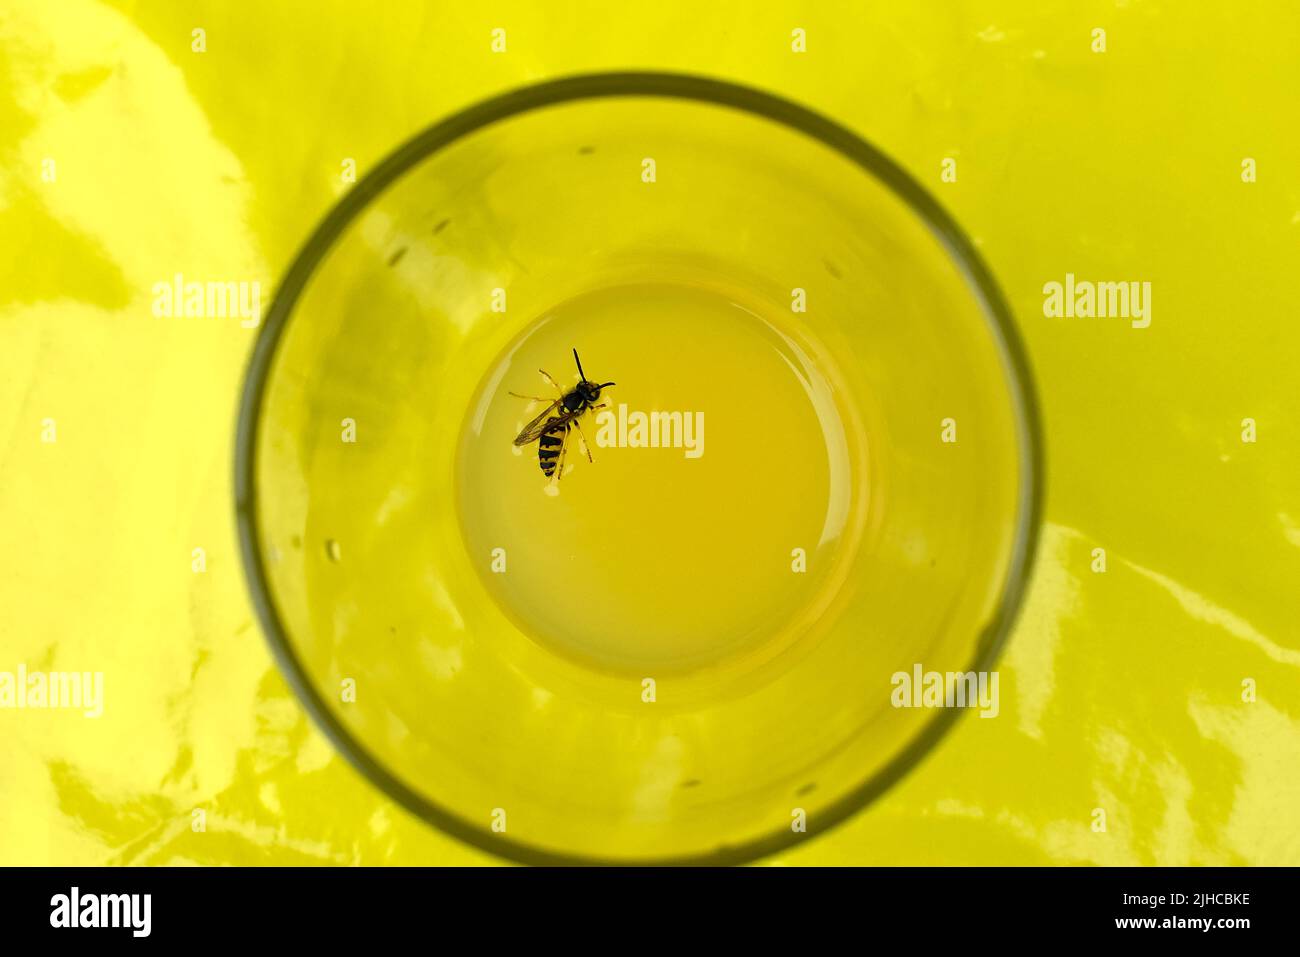 Wasp drowning in a glass of juice, dangerous situation, risk of getting stung Stock Photo